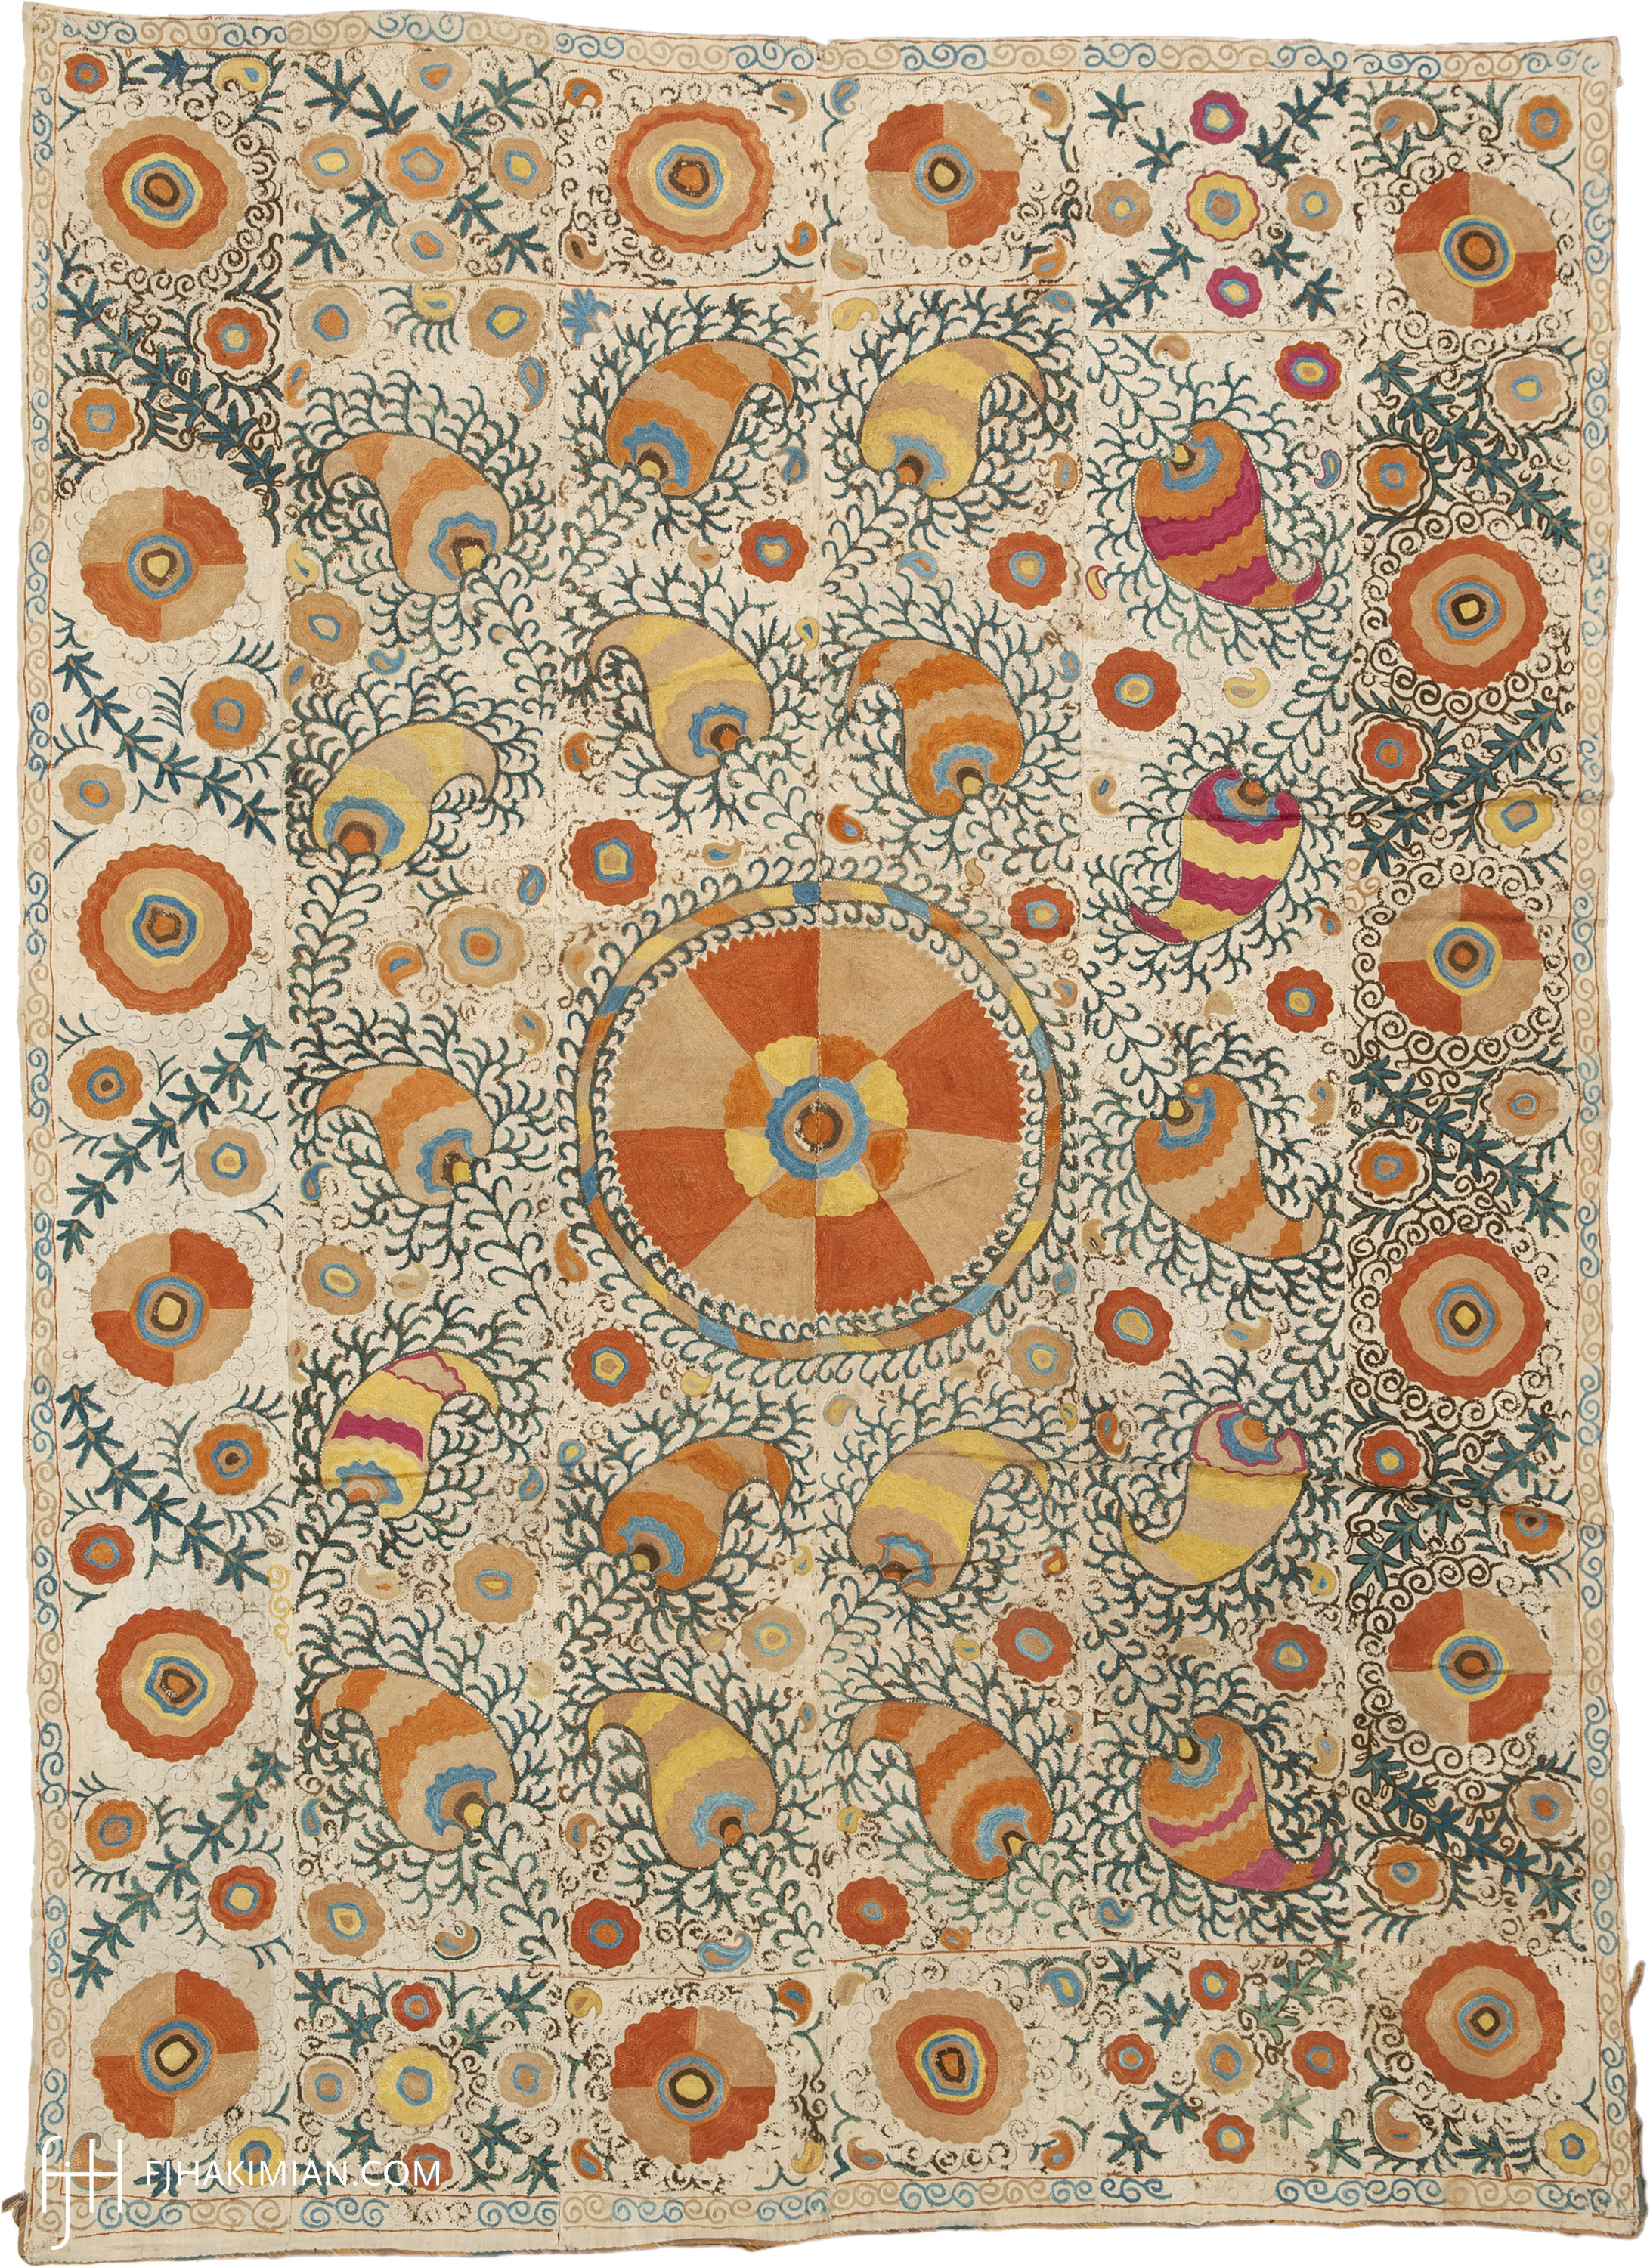 Antique Tapestry | FJ Hakimian | Carpet Gallery in NYC